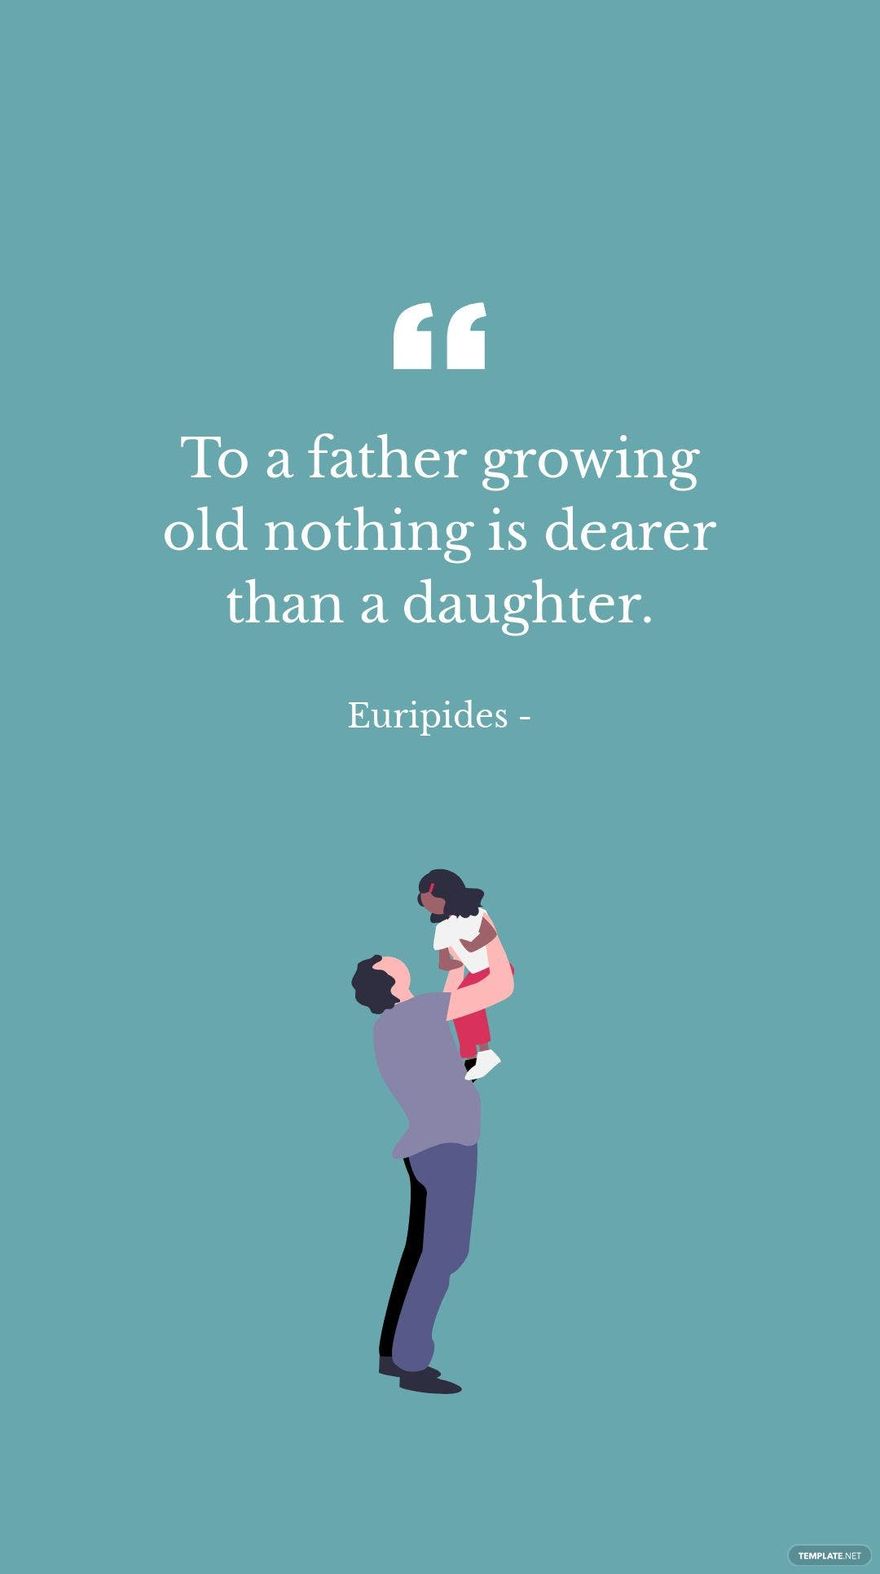 Free EURIPIDES - To a father growing old nothing is dearer than a daughter.